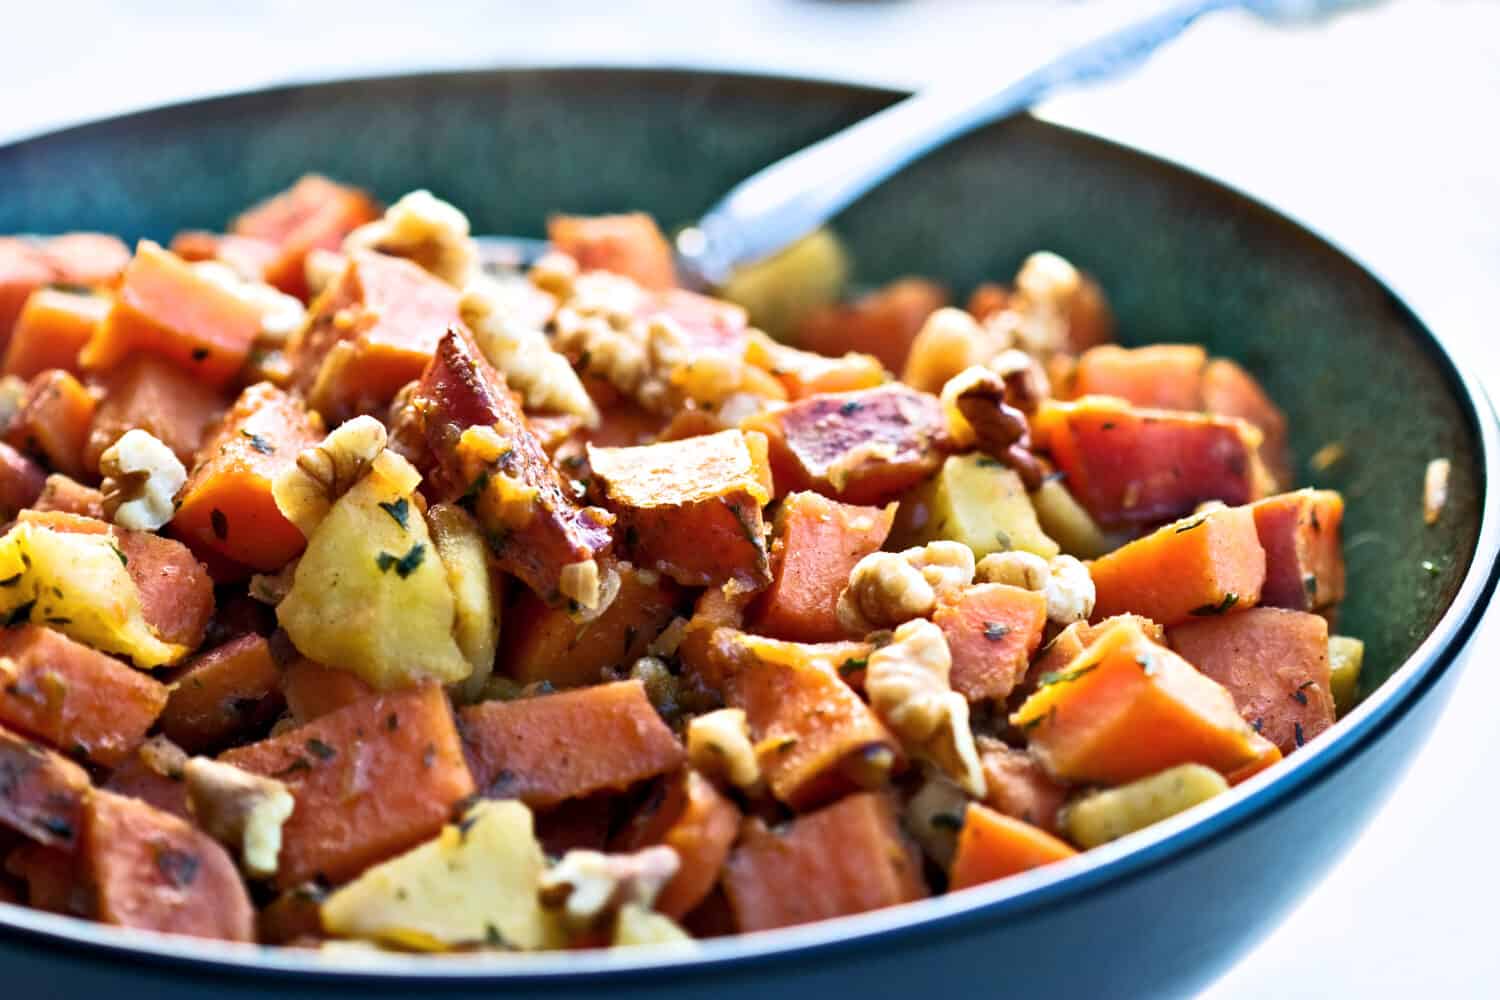 Sweet potato hash, a perfect dish for the holidays. Diced sweet potatoes fried with apples and seasoned with parsley and walnuts.